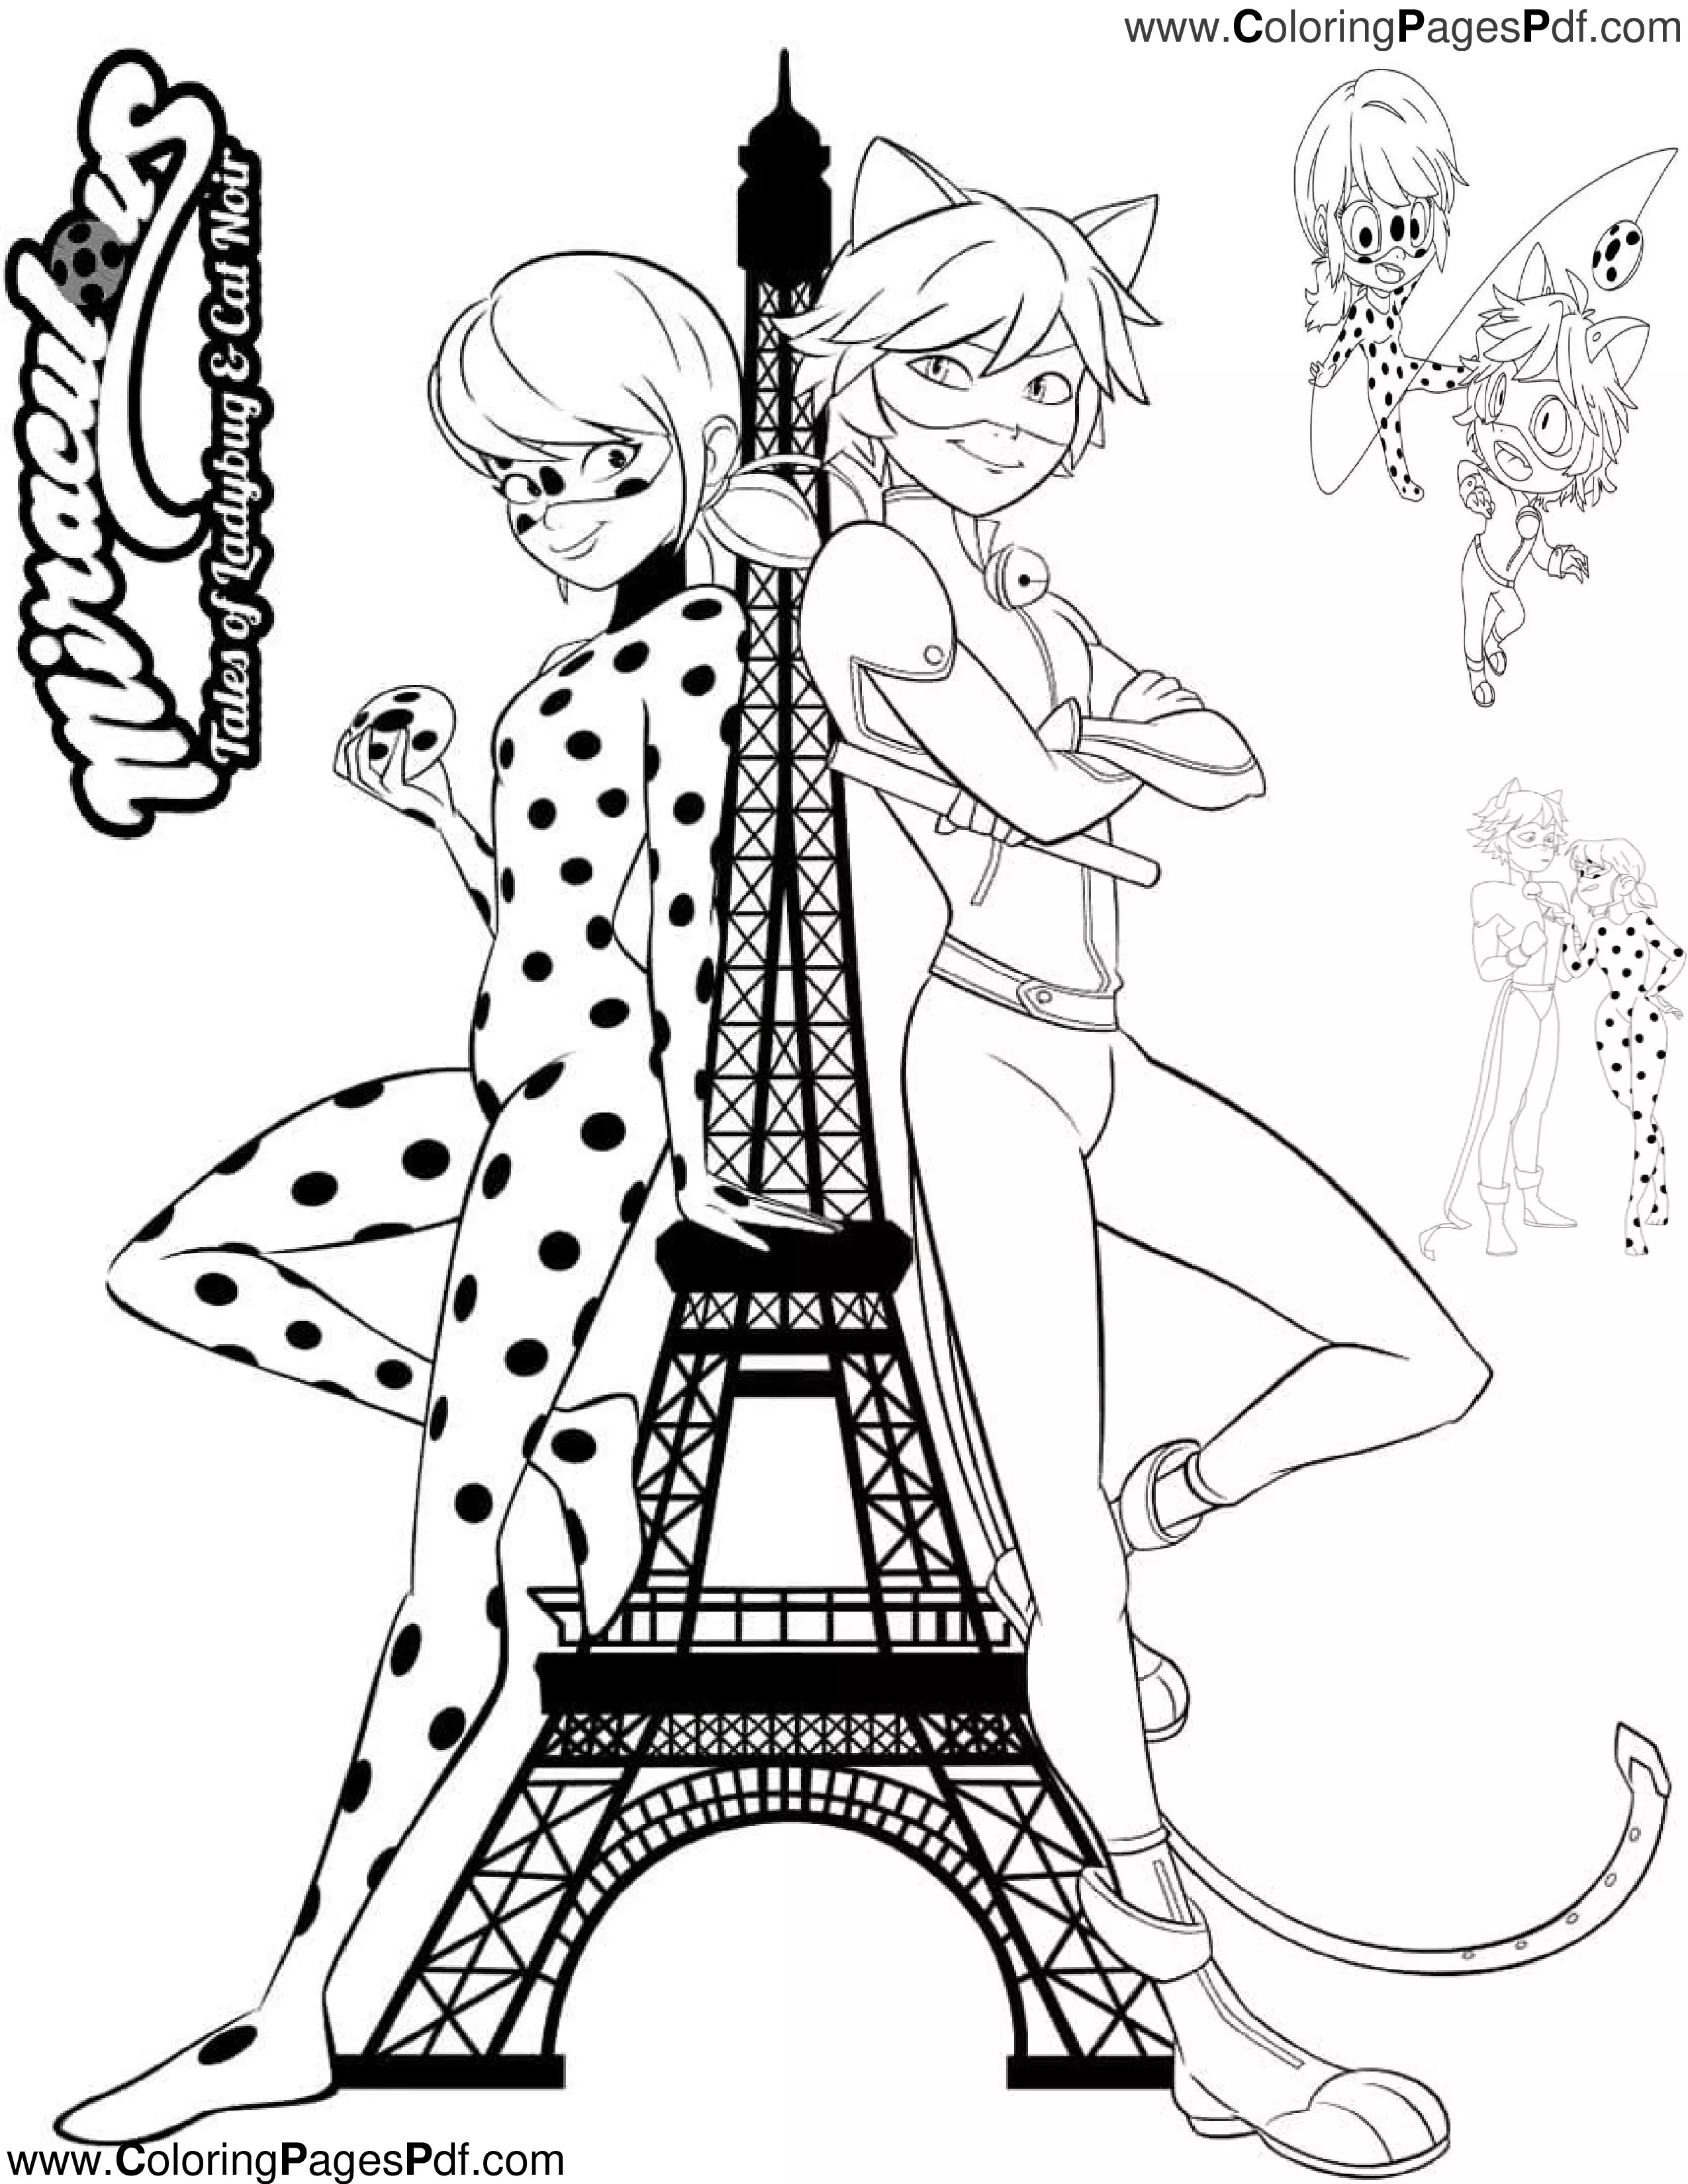 Miraculous ladybug and cat noir coloring games